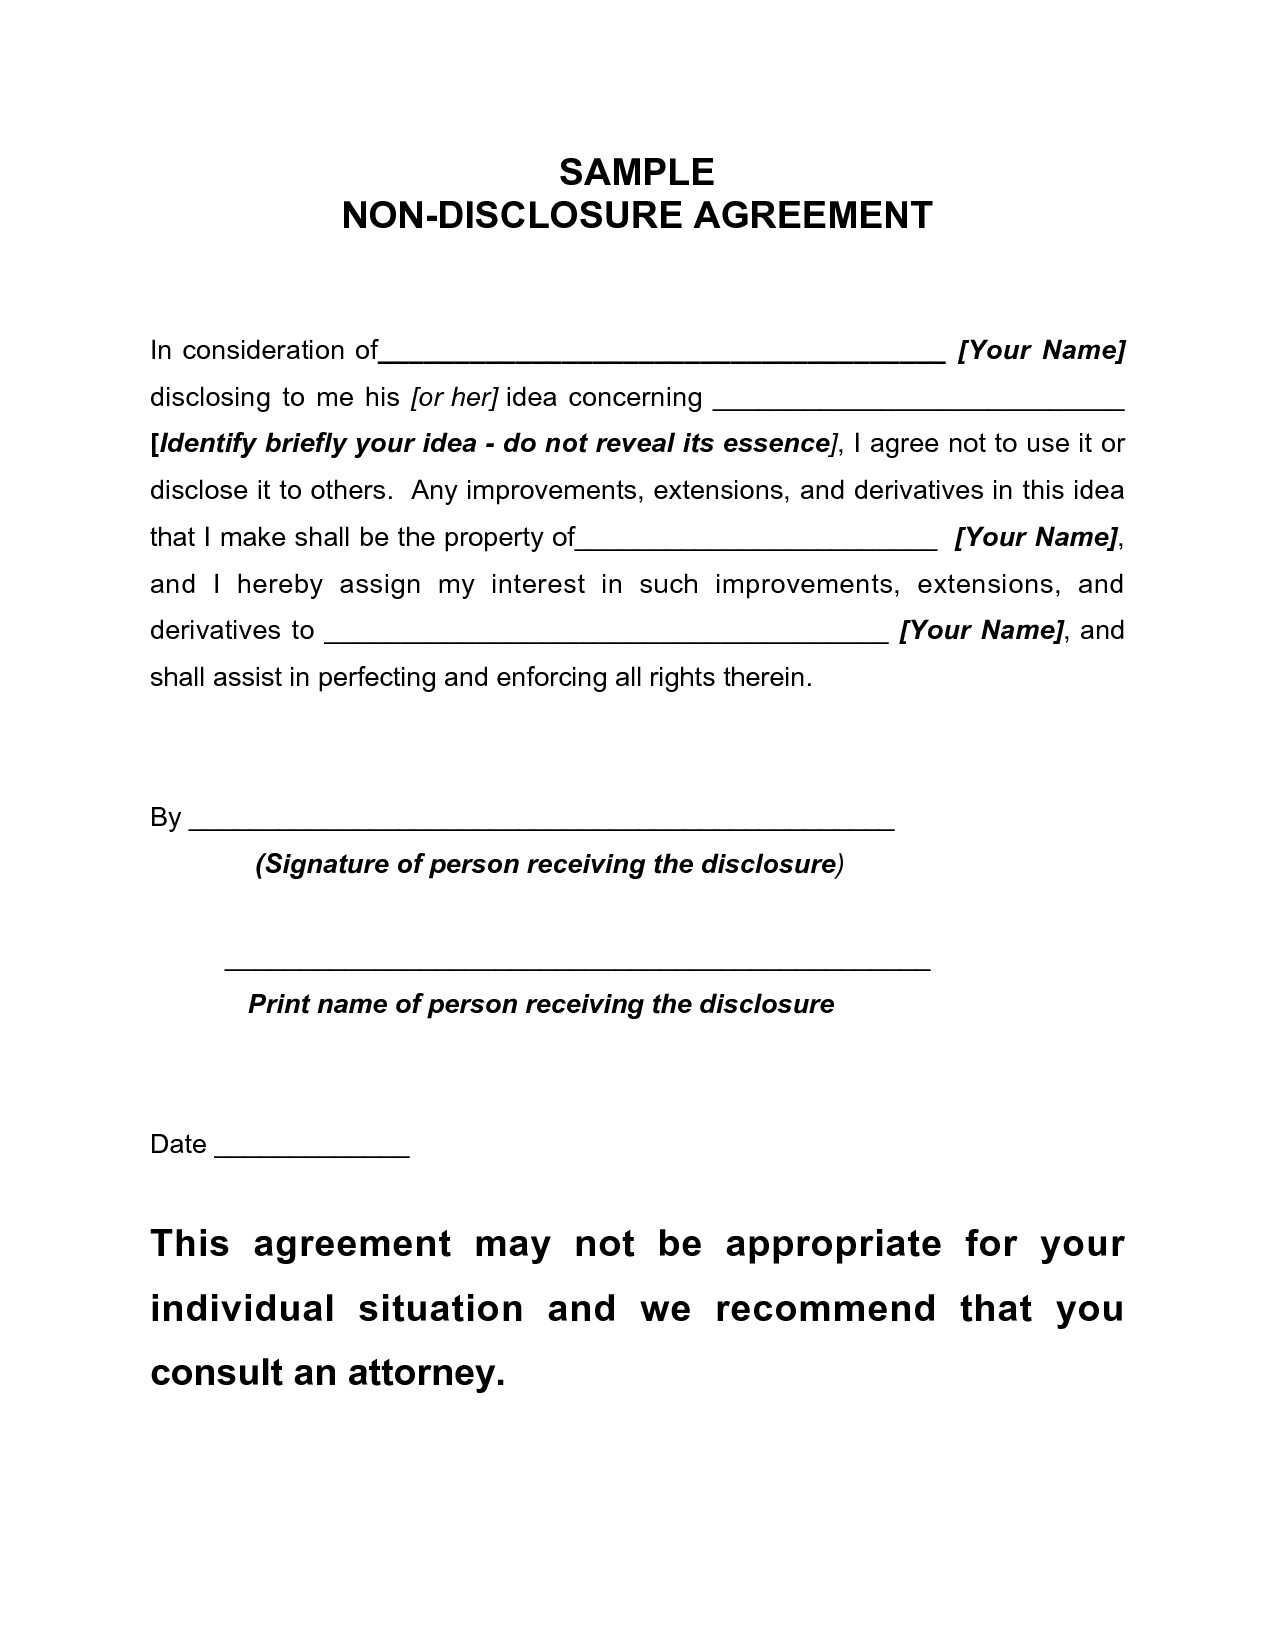 Free Agreement Form Non Disclosure Agreement Sample Free Printable - Free Printable Non Disclosure Agreement Form